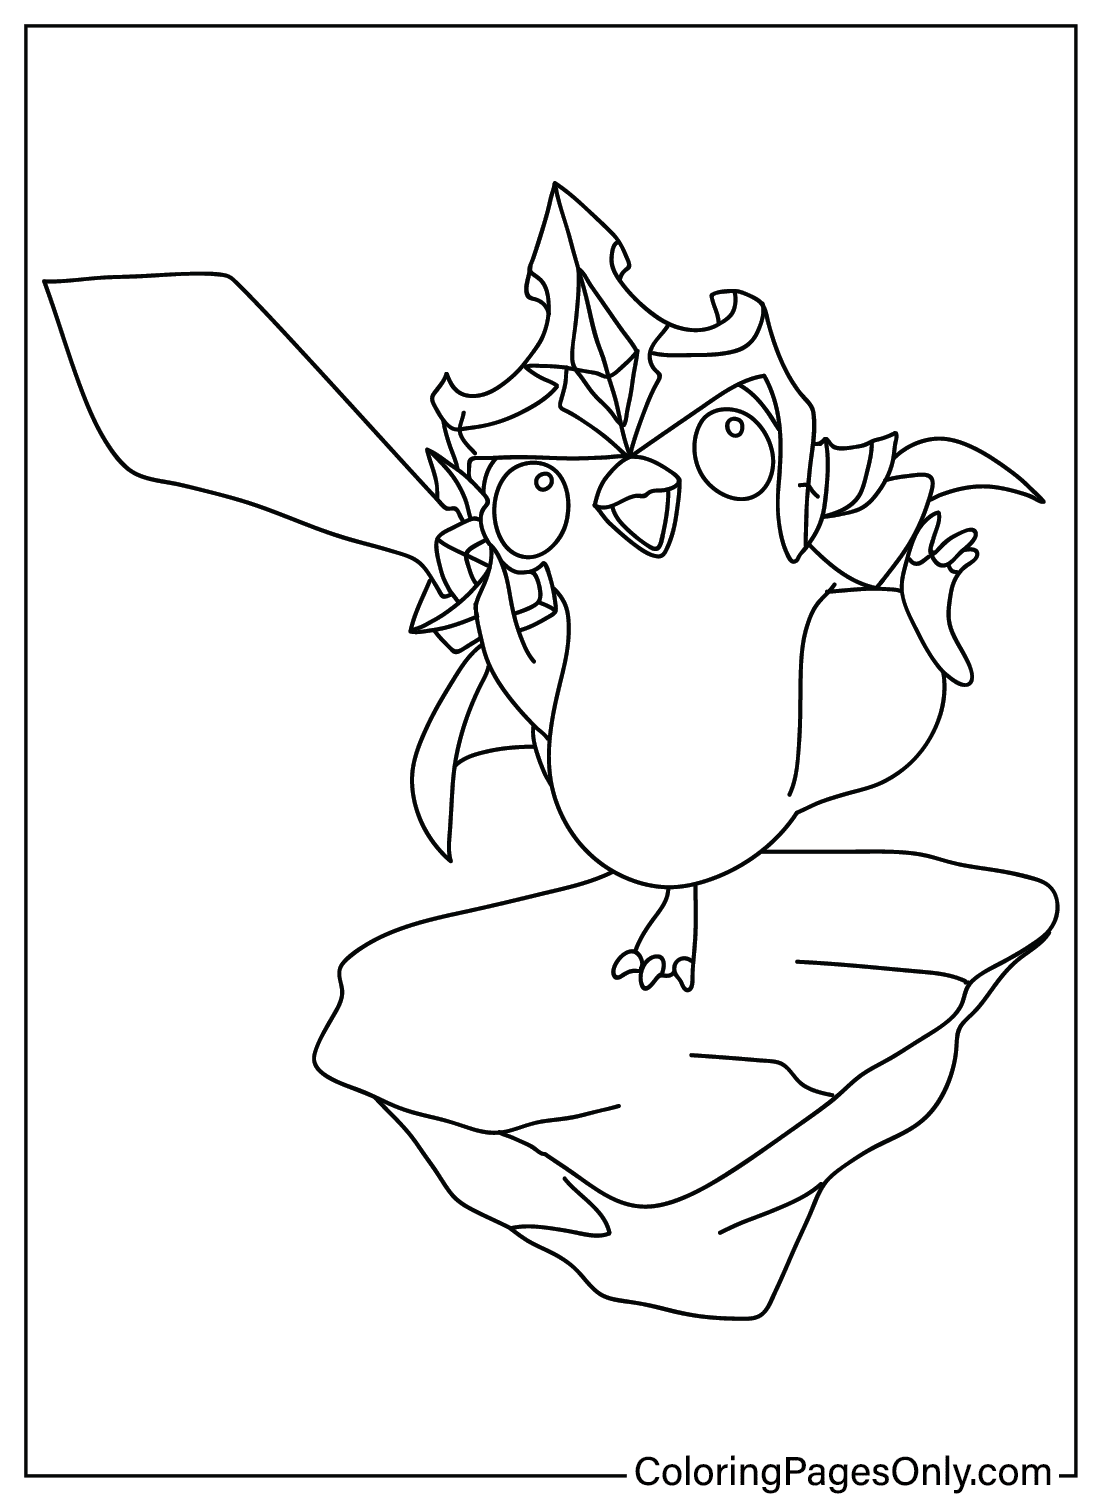 Teamfight Tactics Nardo Coloring Page from Teamfight Tactics